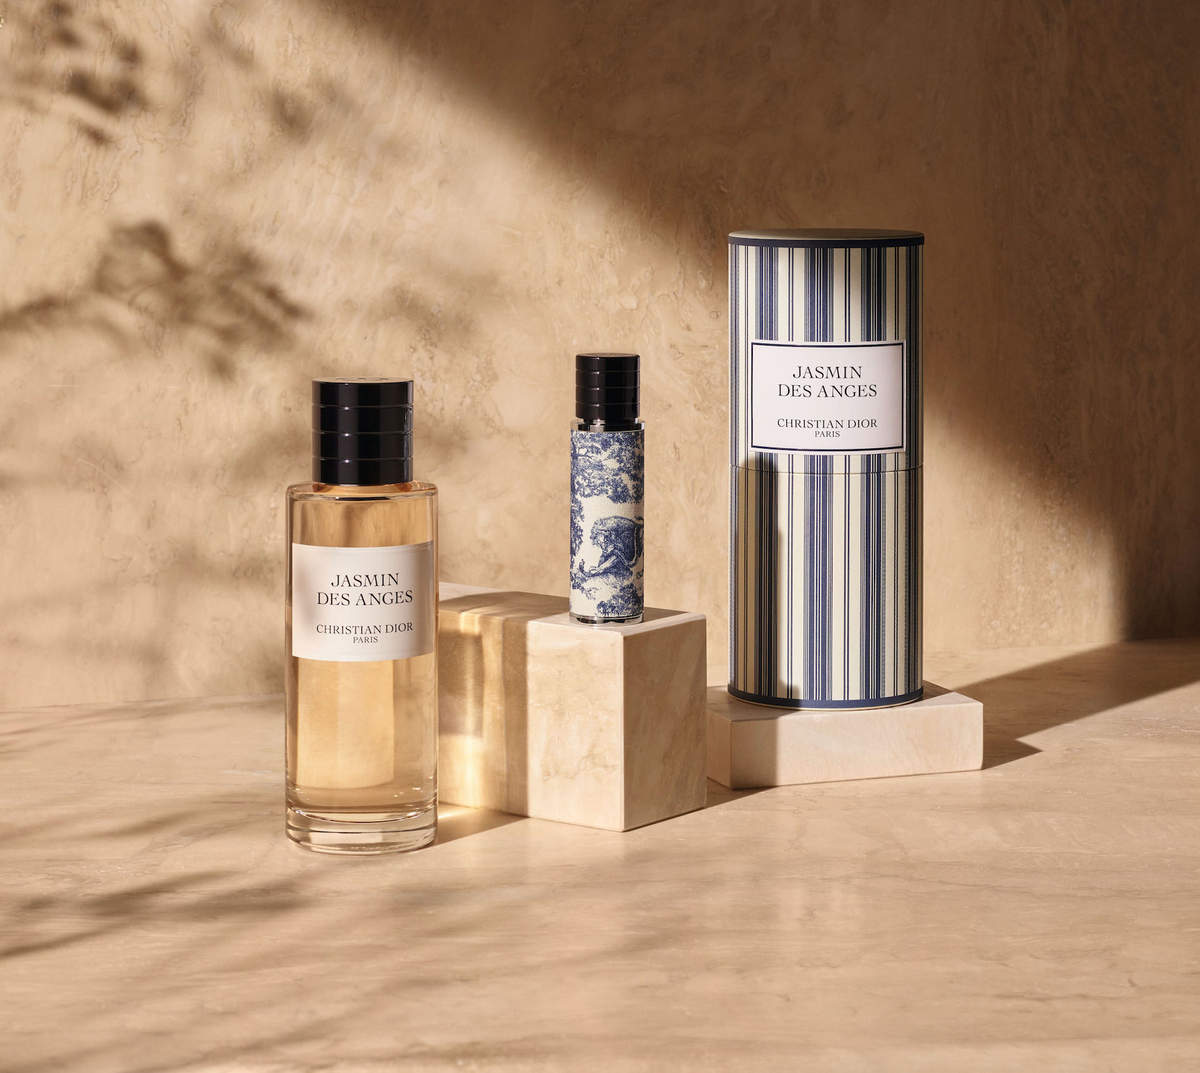 5 new summer scents we're loving right now, from Louis Vuitton's Pacific  Chill perfume and Dior's La Collection Privée Dioriviera evoking the South  of France, to Tom Ford's Neroli Portofino